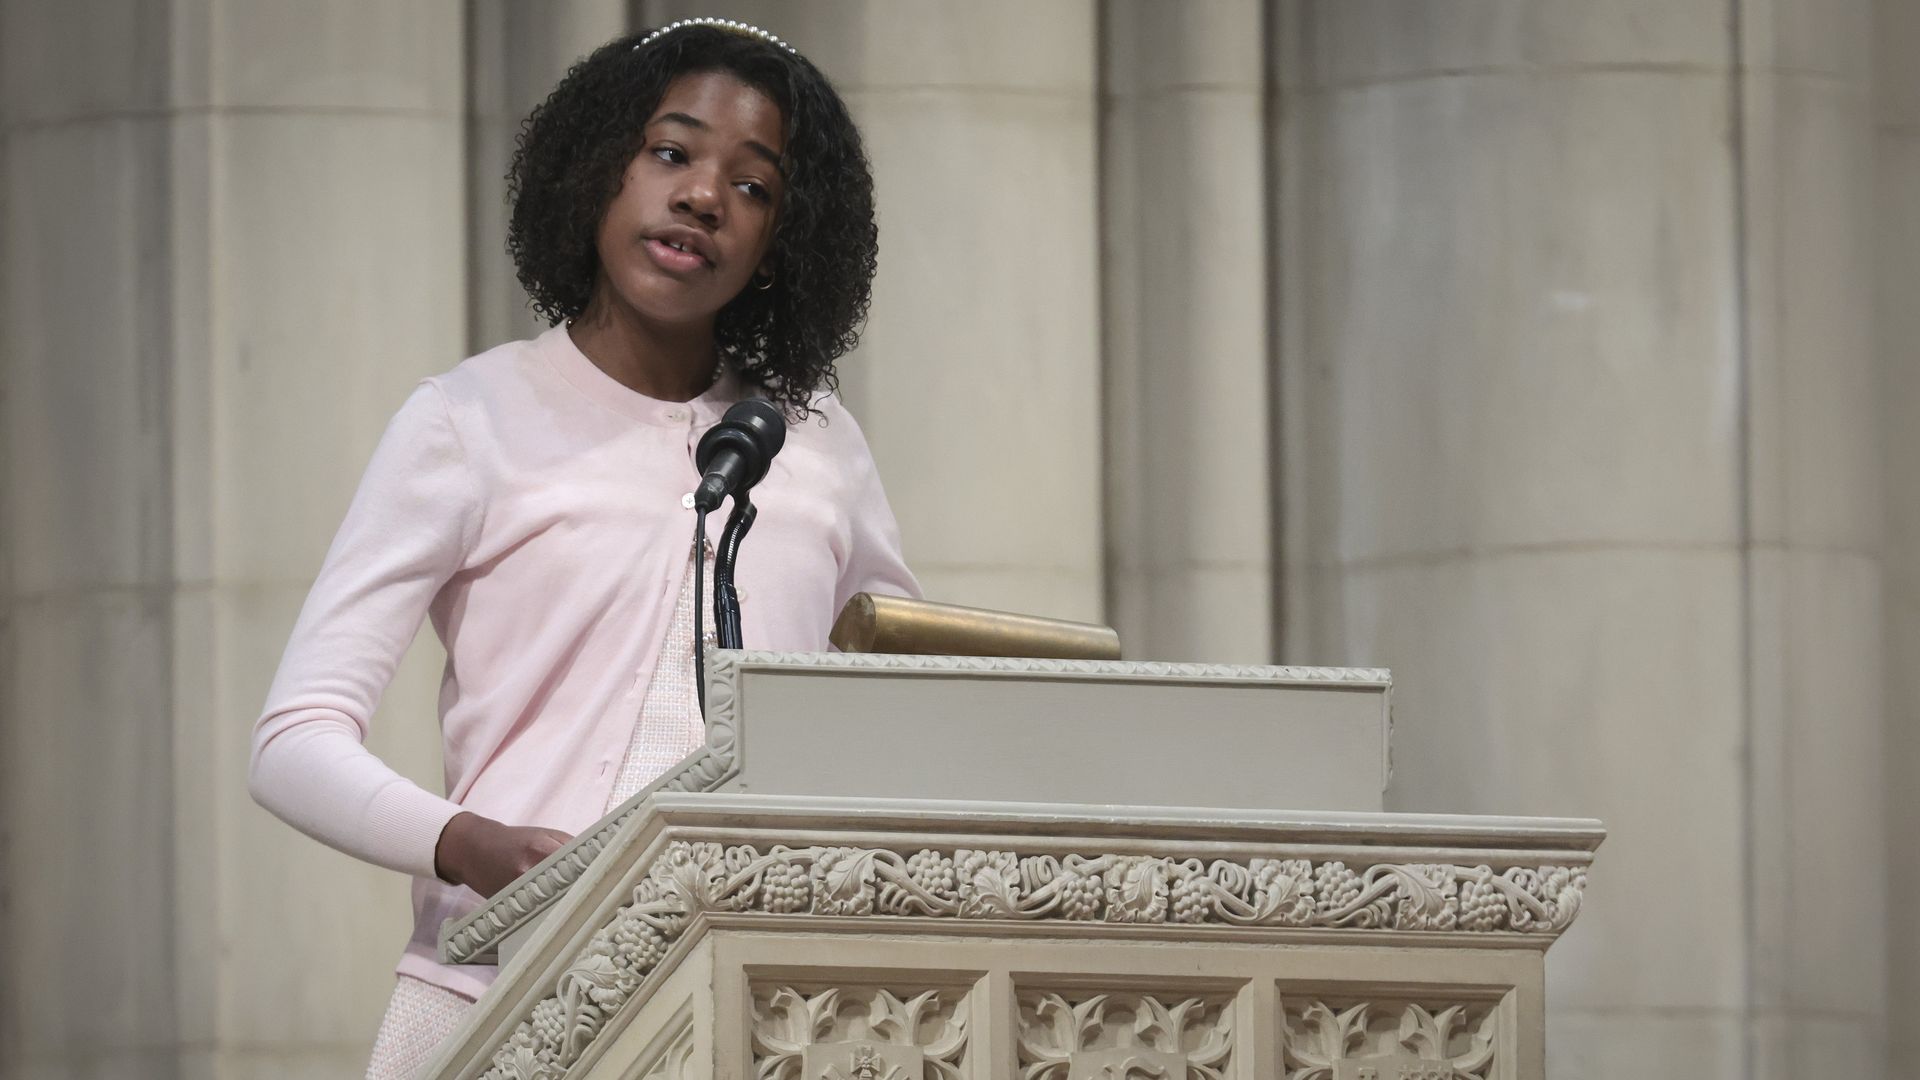 The granddaughter of Martin Luther King Jr. is seen speaking from the same pulpit from which he delivered his final Sunday sermon.